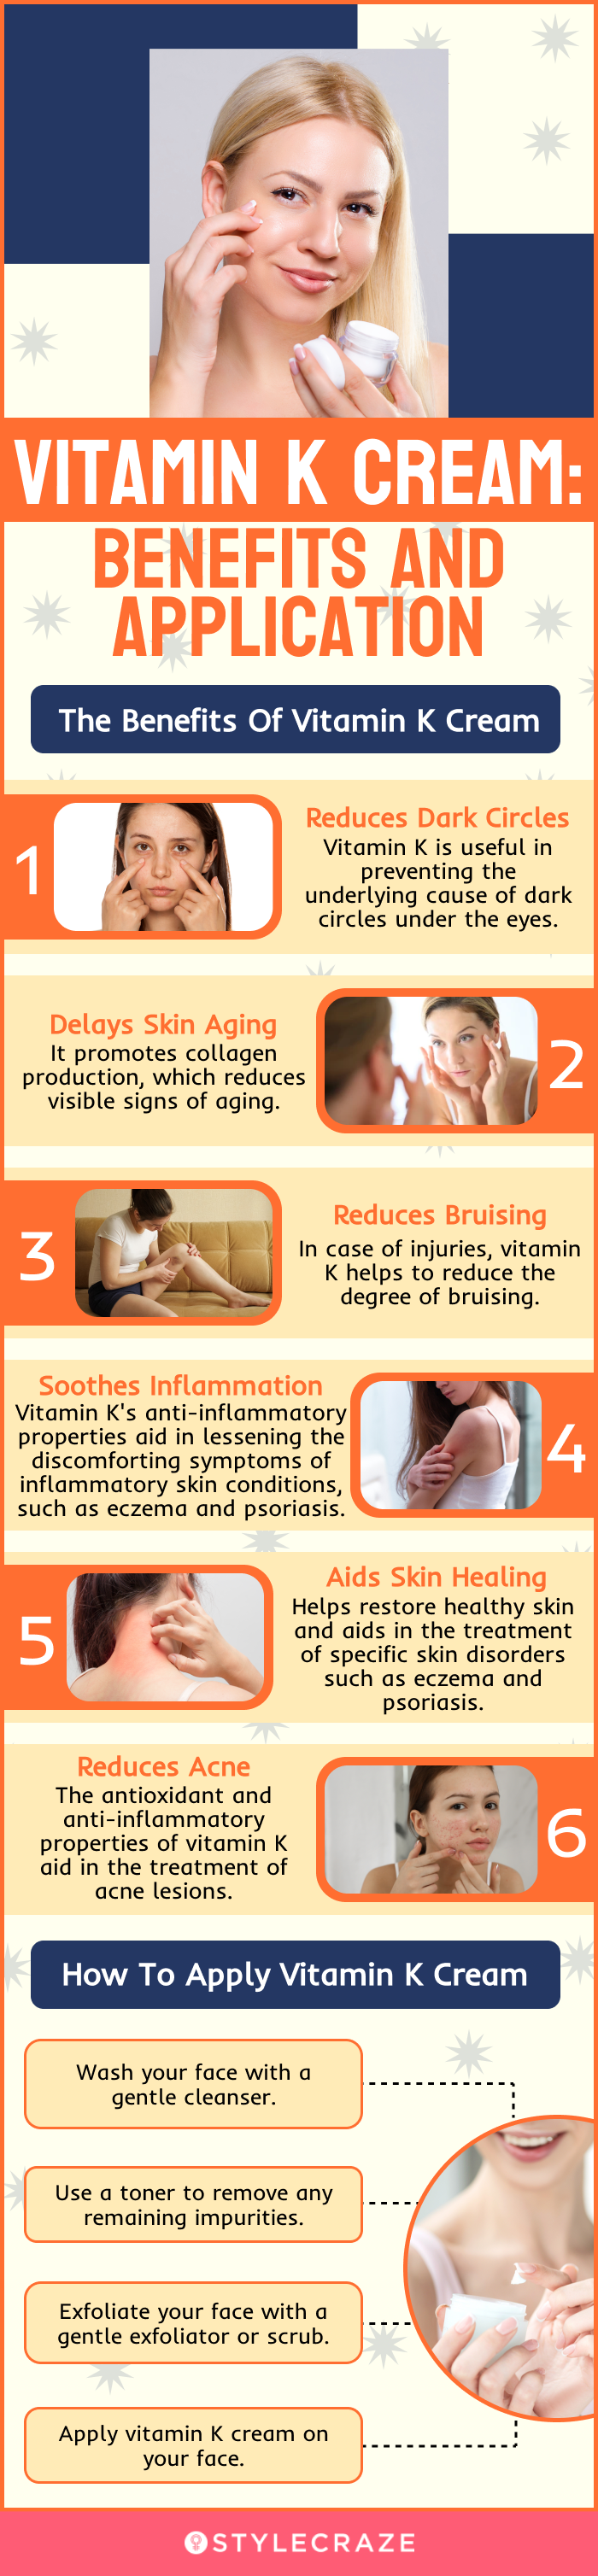  Vitamin K Cream: Benefits and Application (infographic)